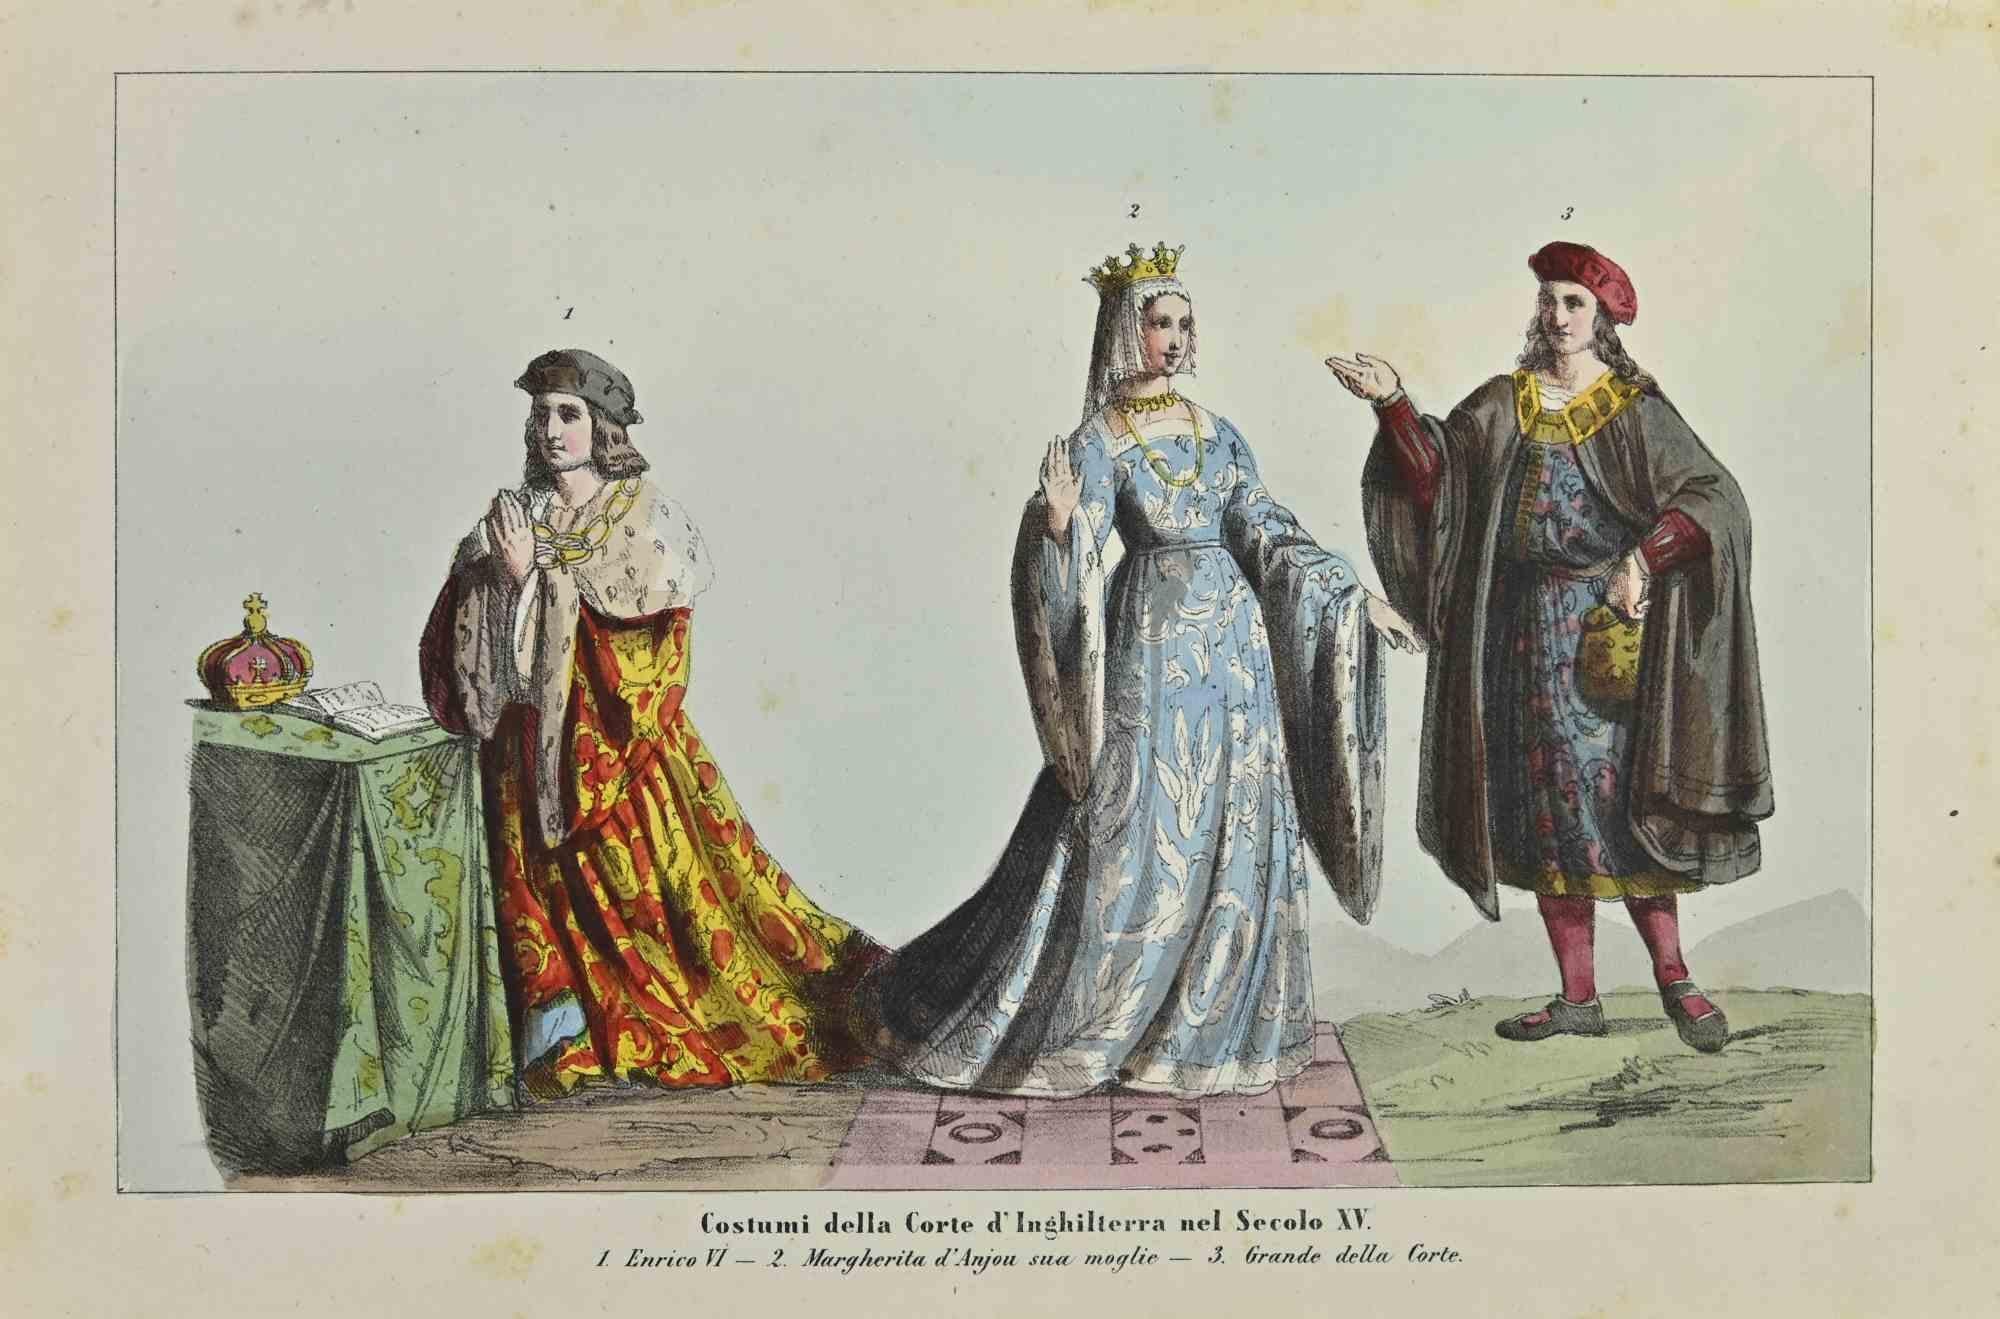 Costumes of the Court of England in the 15th century is a lithograph made by Auguste Wahlen in 1844.

Hand colored.

Good condition.

At the center of the artwork is the original title "Costumi della Corte d'Inghilterra nel Secolo XV".

The work is